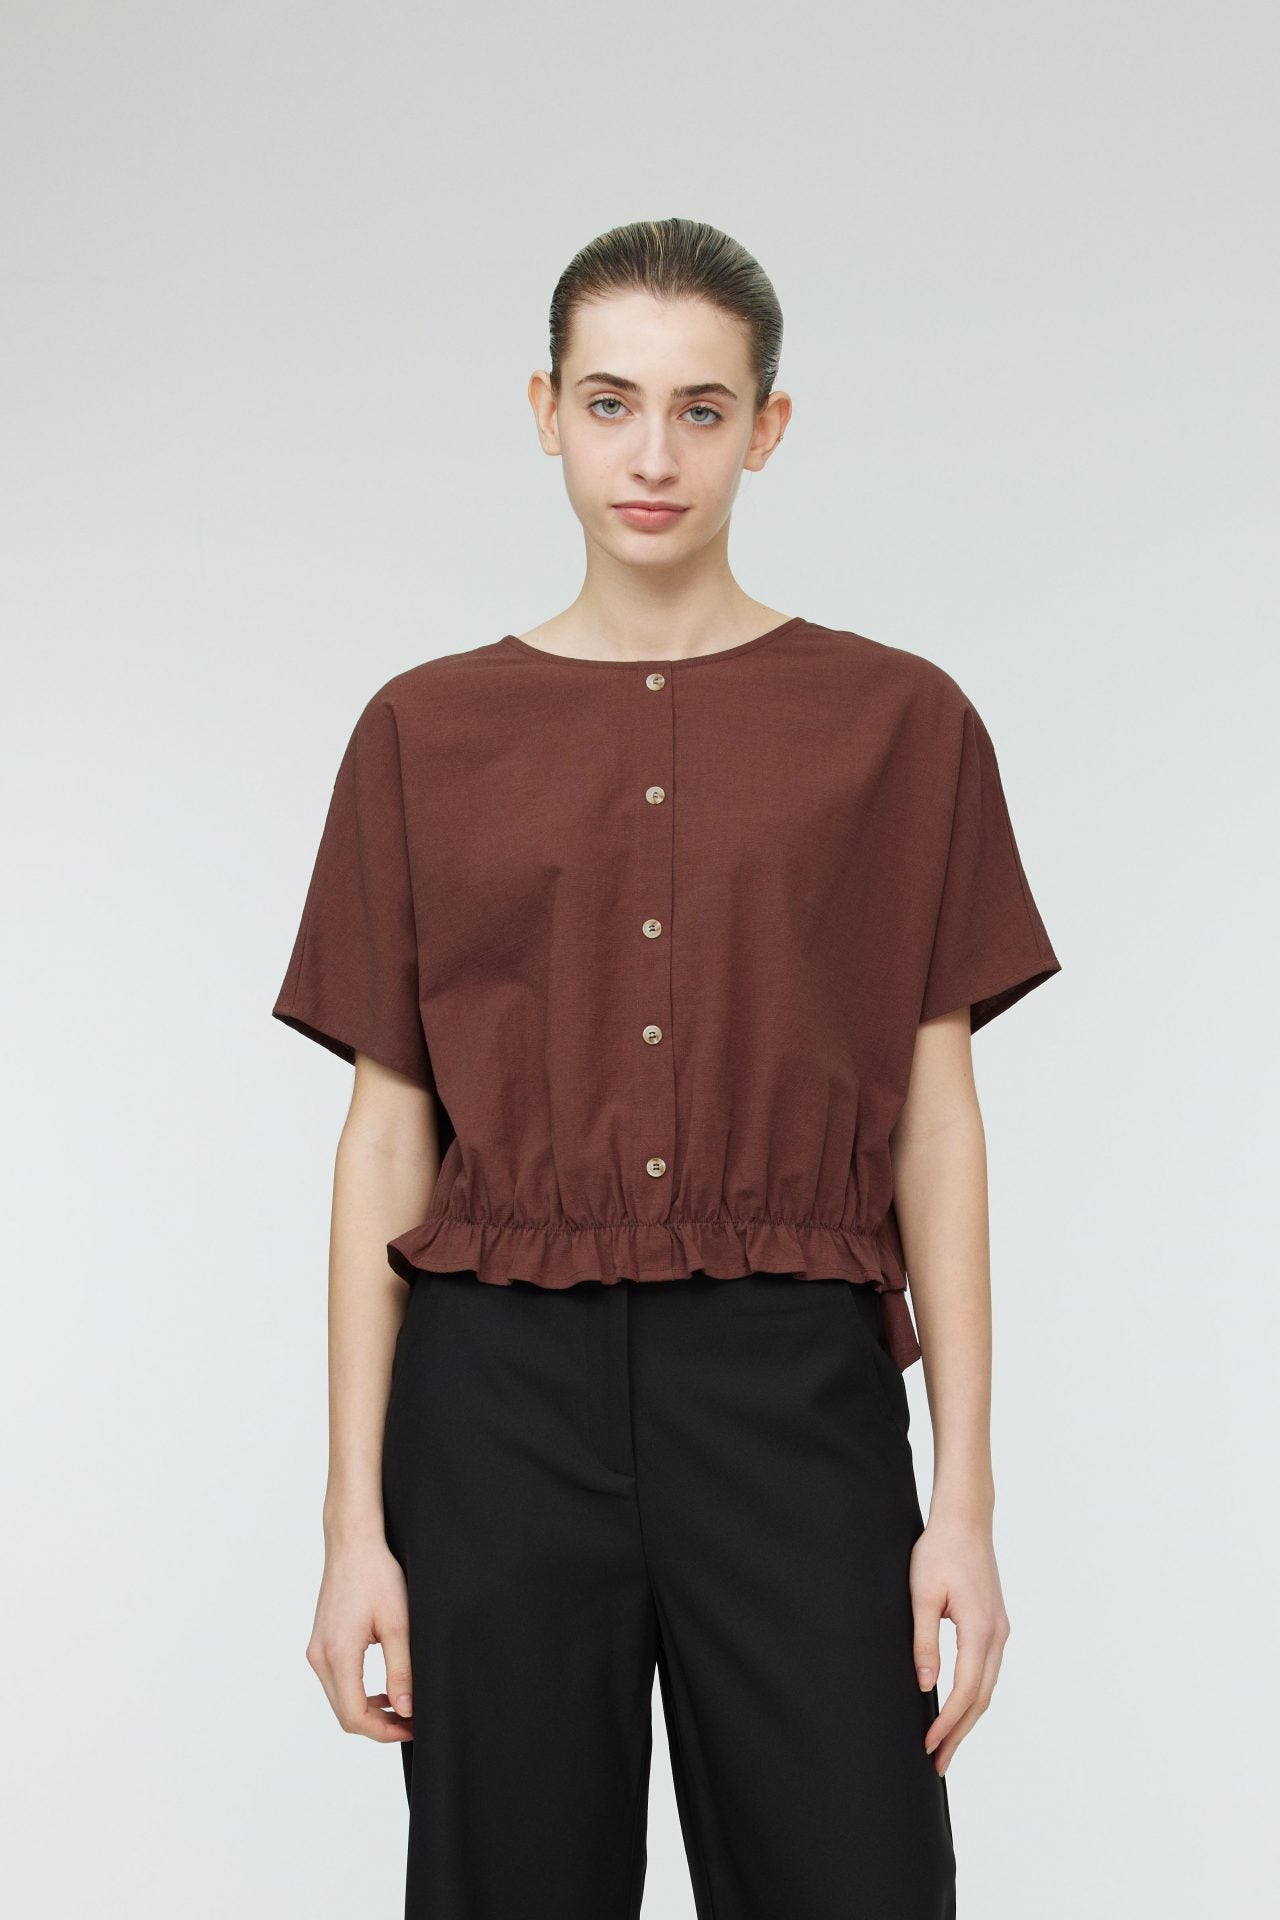 AB 10166 BUTTON FRONT ELASTIC WAIST BAND TOP D.BROWN